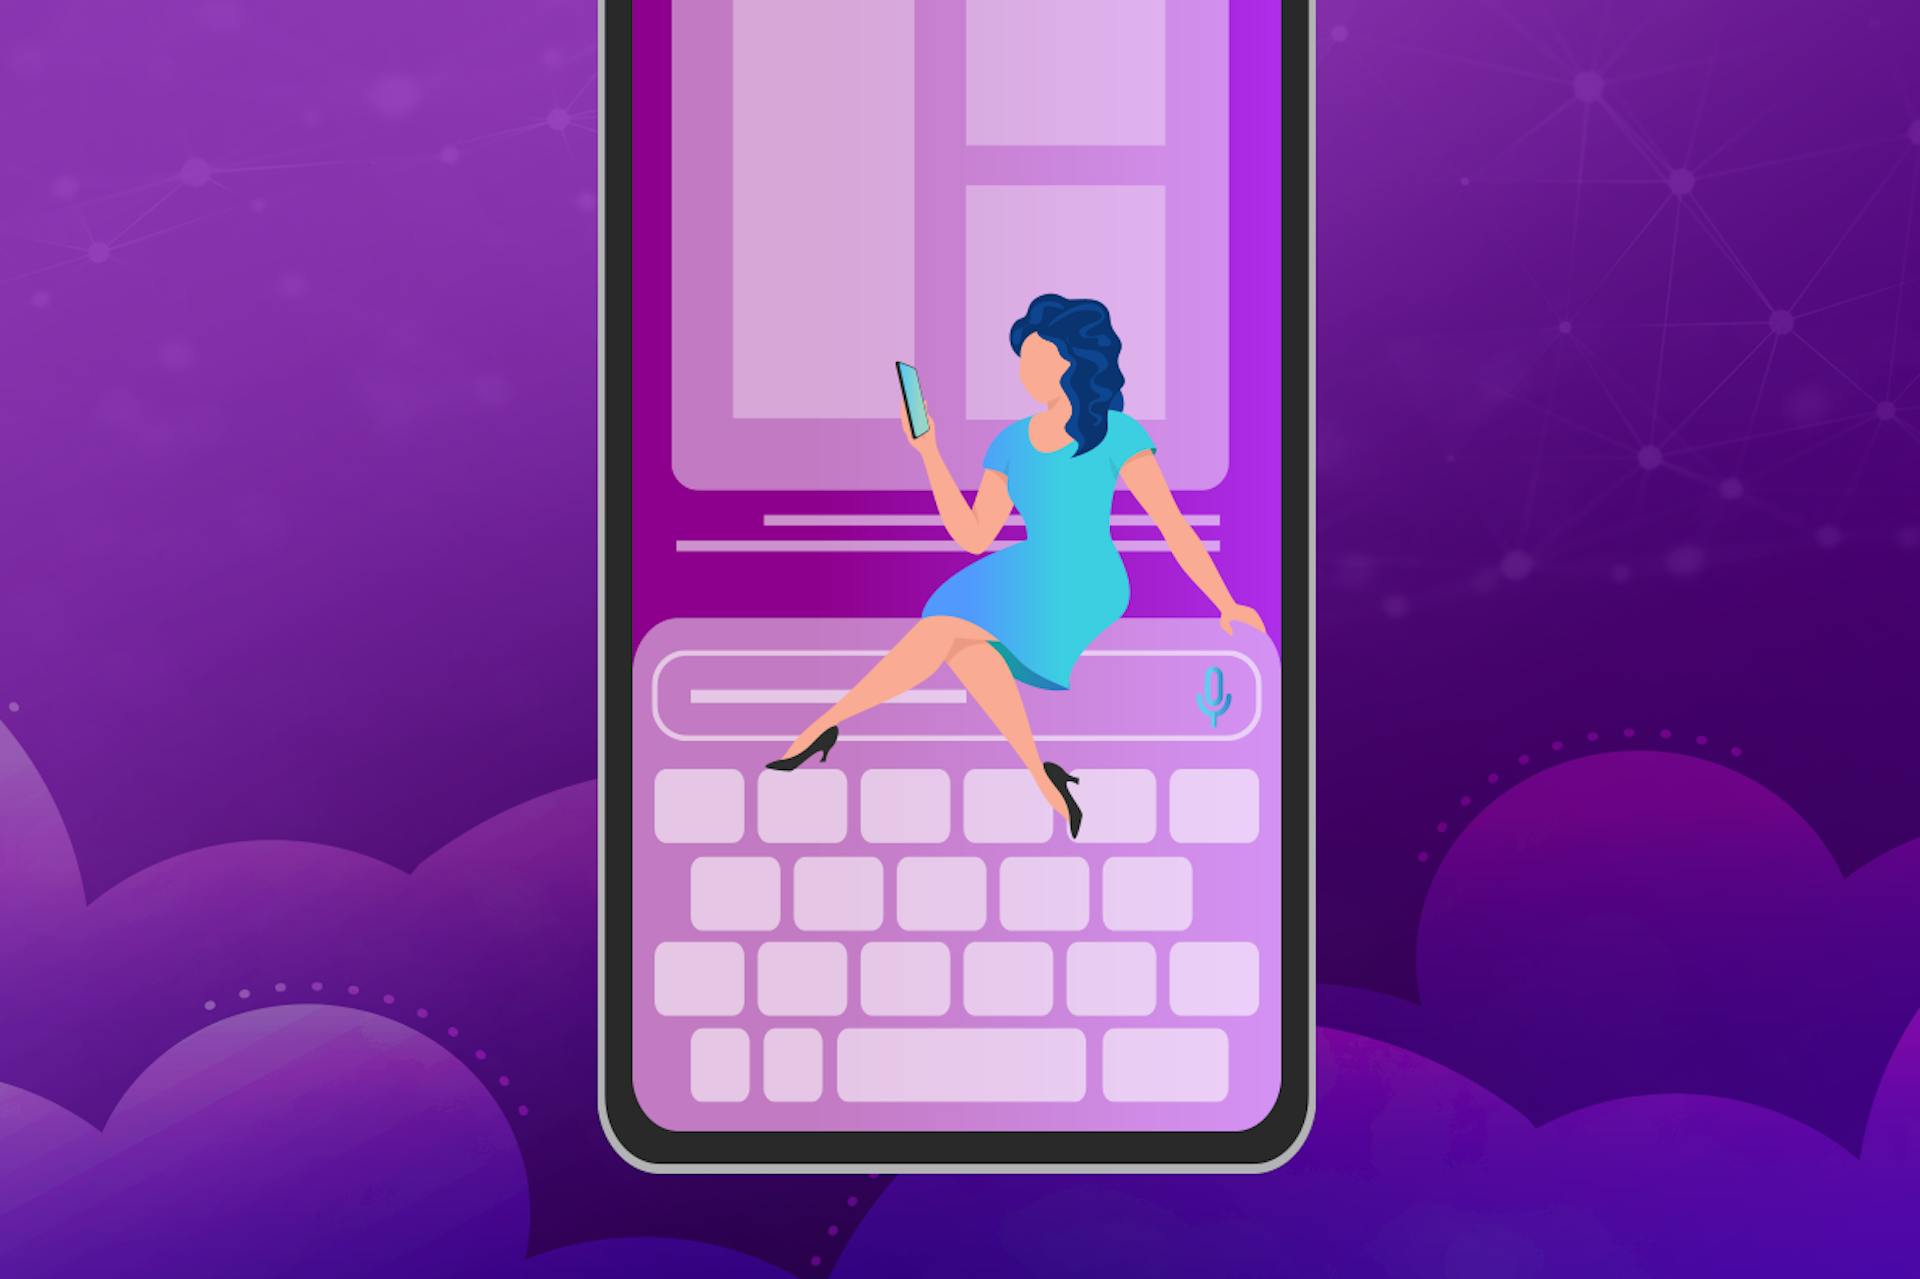 illustrated image of a purple background with a woman in blue sitting on a phone screen using her own smartphone